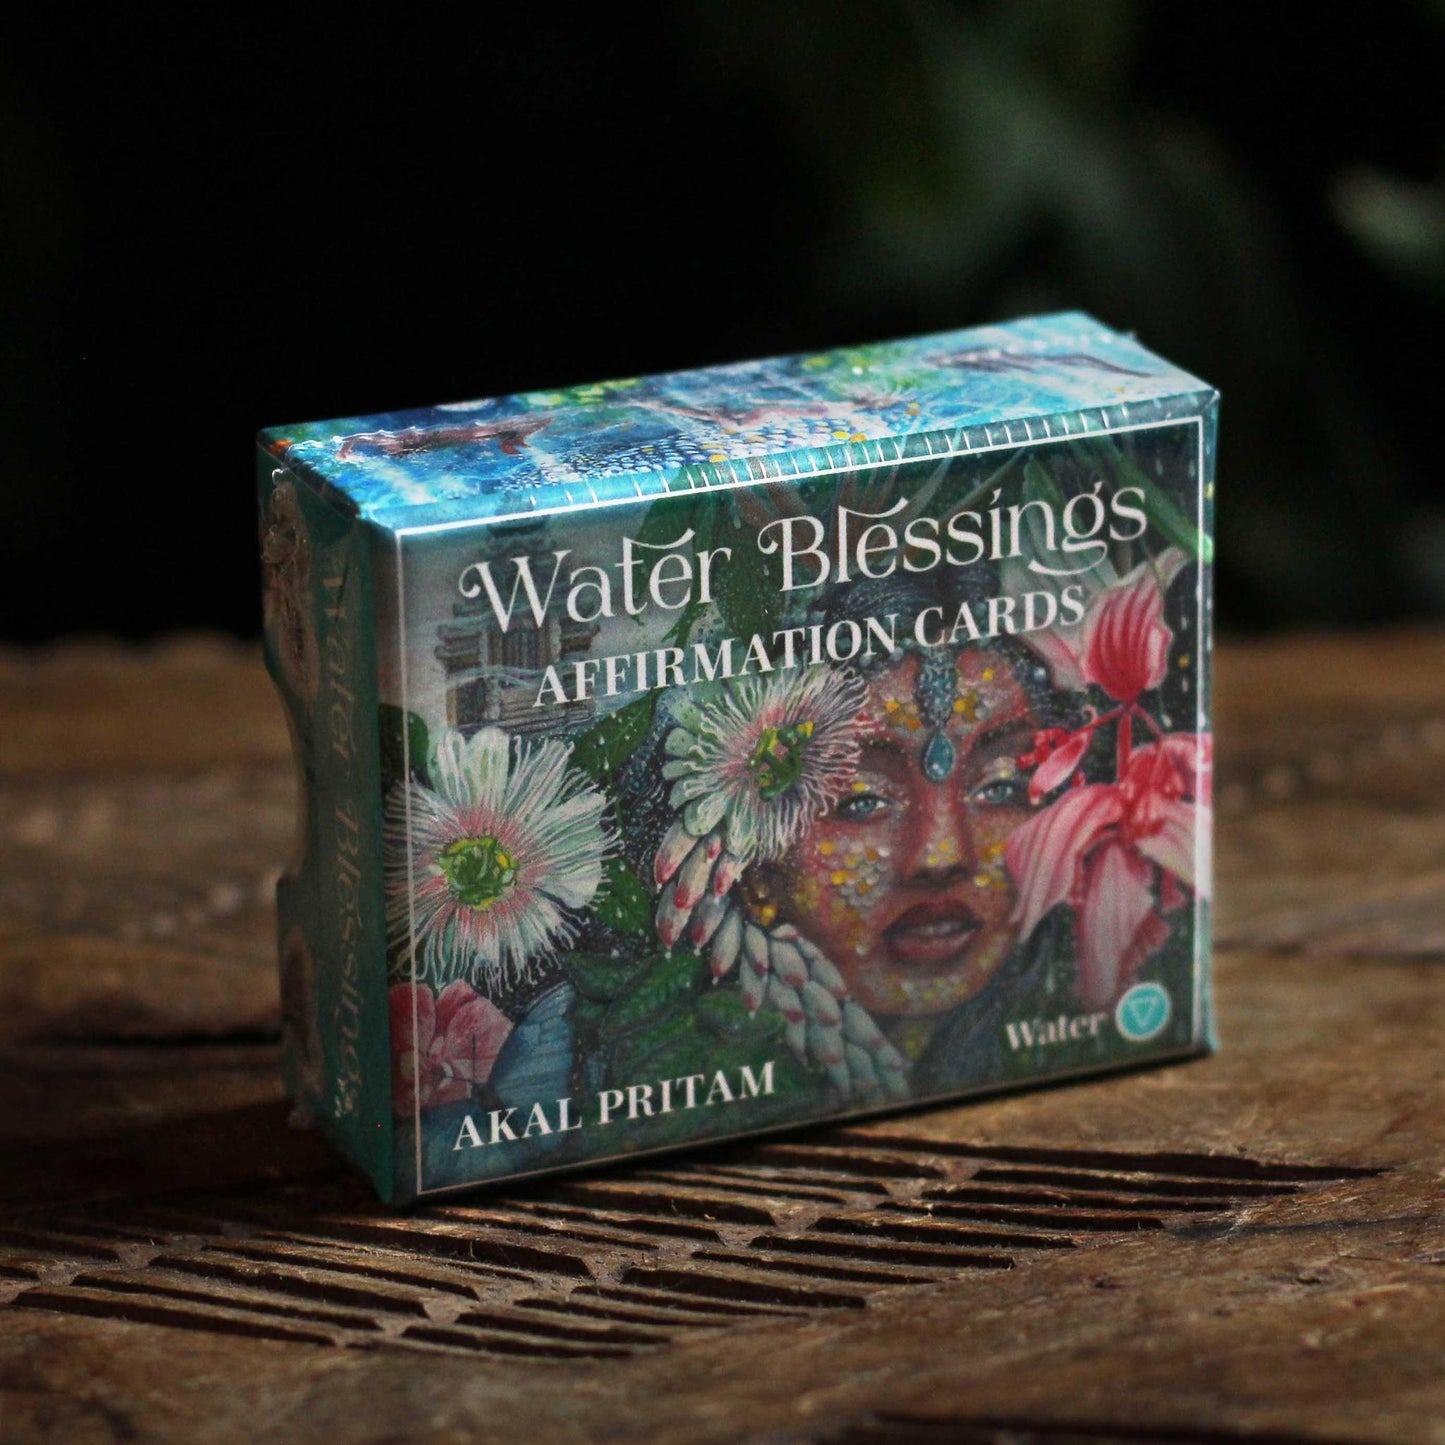 WATER BLESSING - AFFIRMATION CARDS